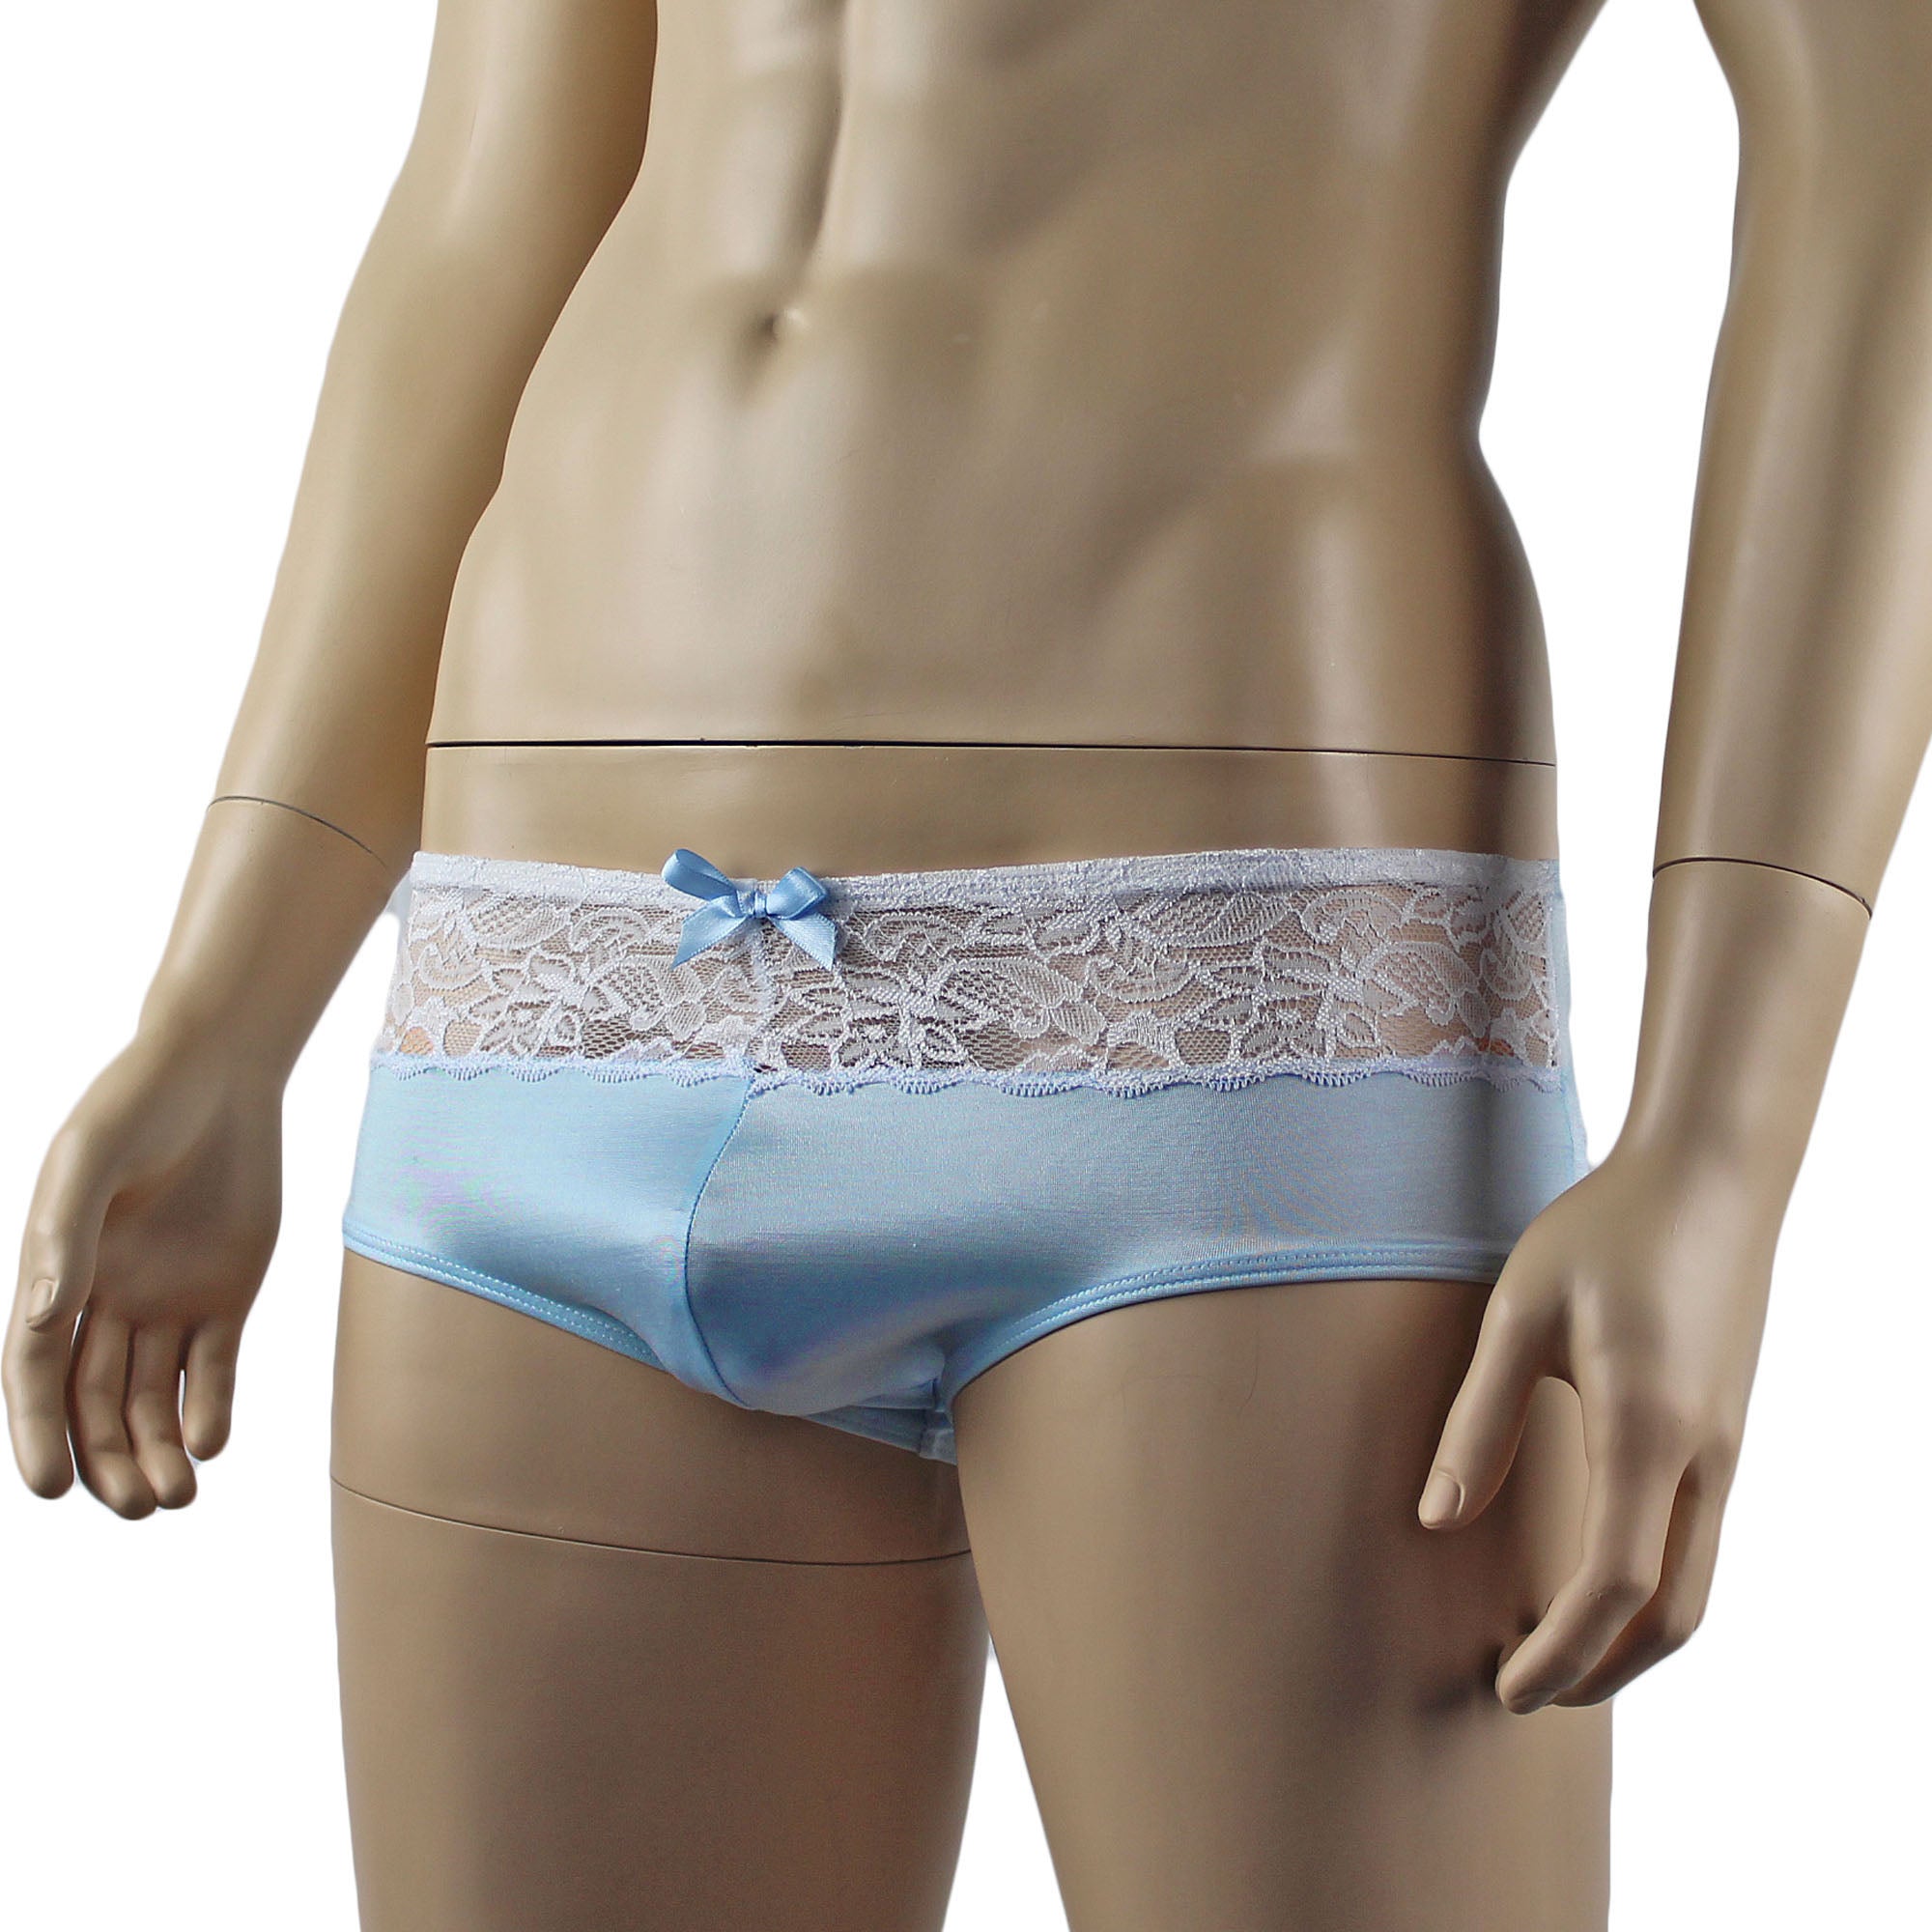 Mens Joanne Underwear Lacey Lovelies Boxer Brief Panties Light Blue and White